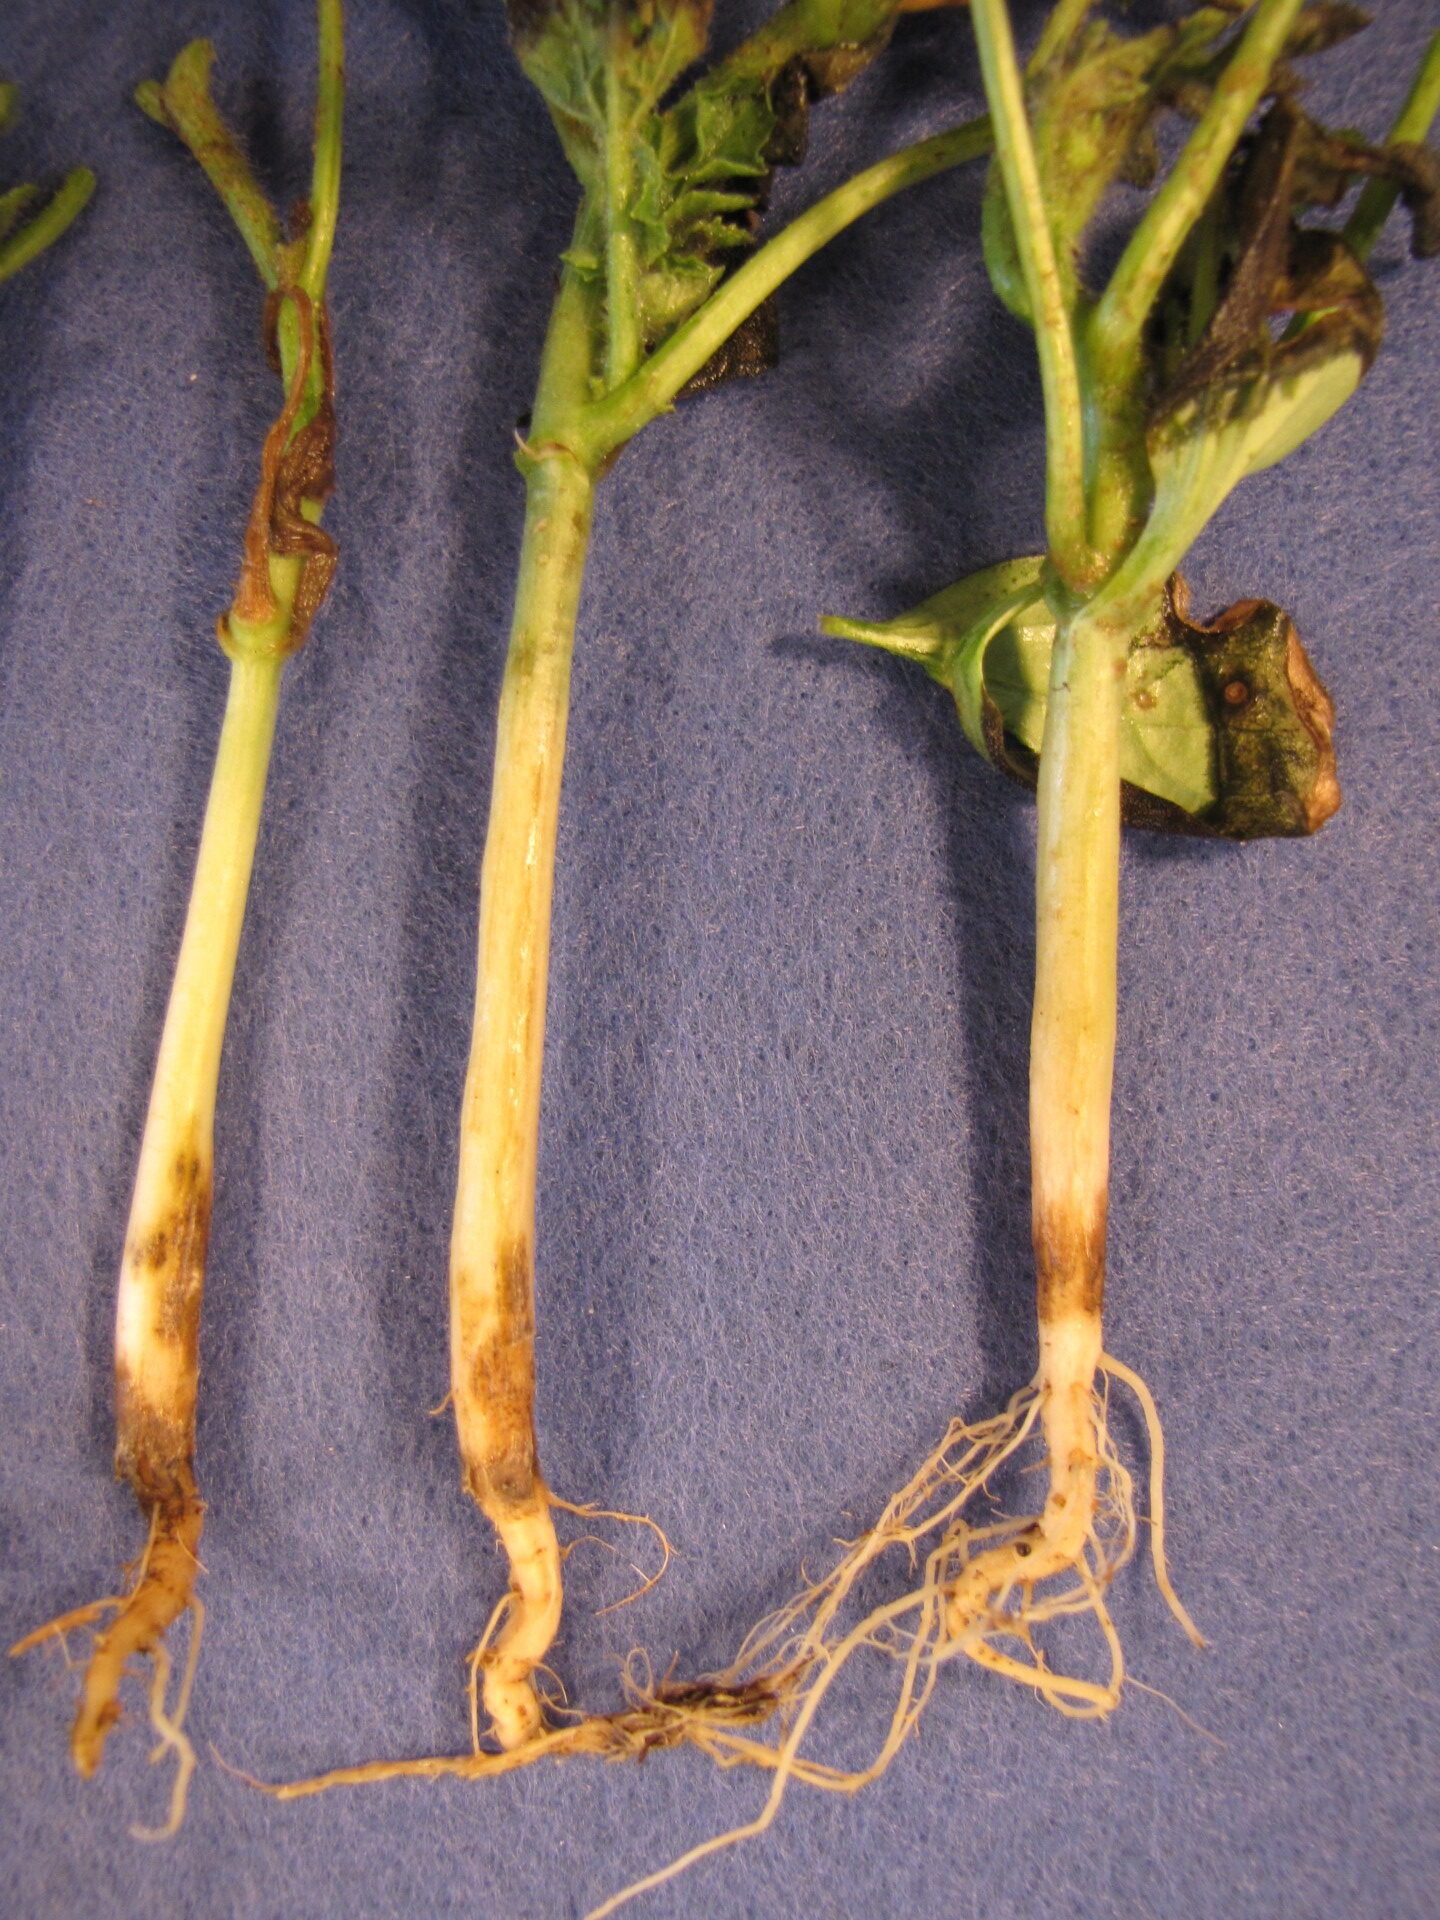 Figure 2. Dark areas on the hypocotyl of this watermelon seedling is caused by chlamydospores (resting spores) of the fungus that causes black root rot (Thielaviopsis basicola).